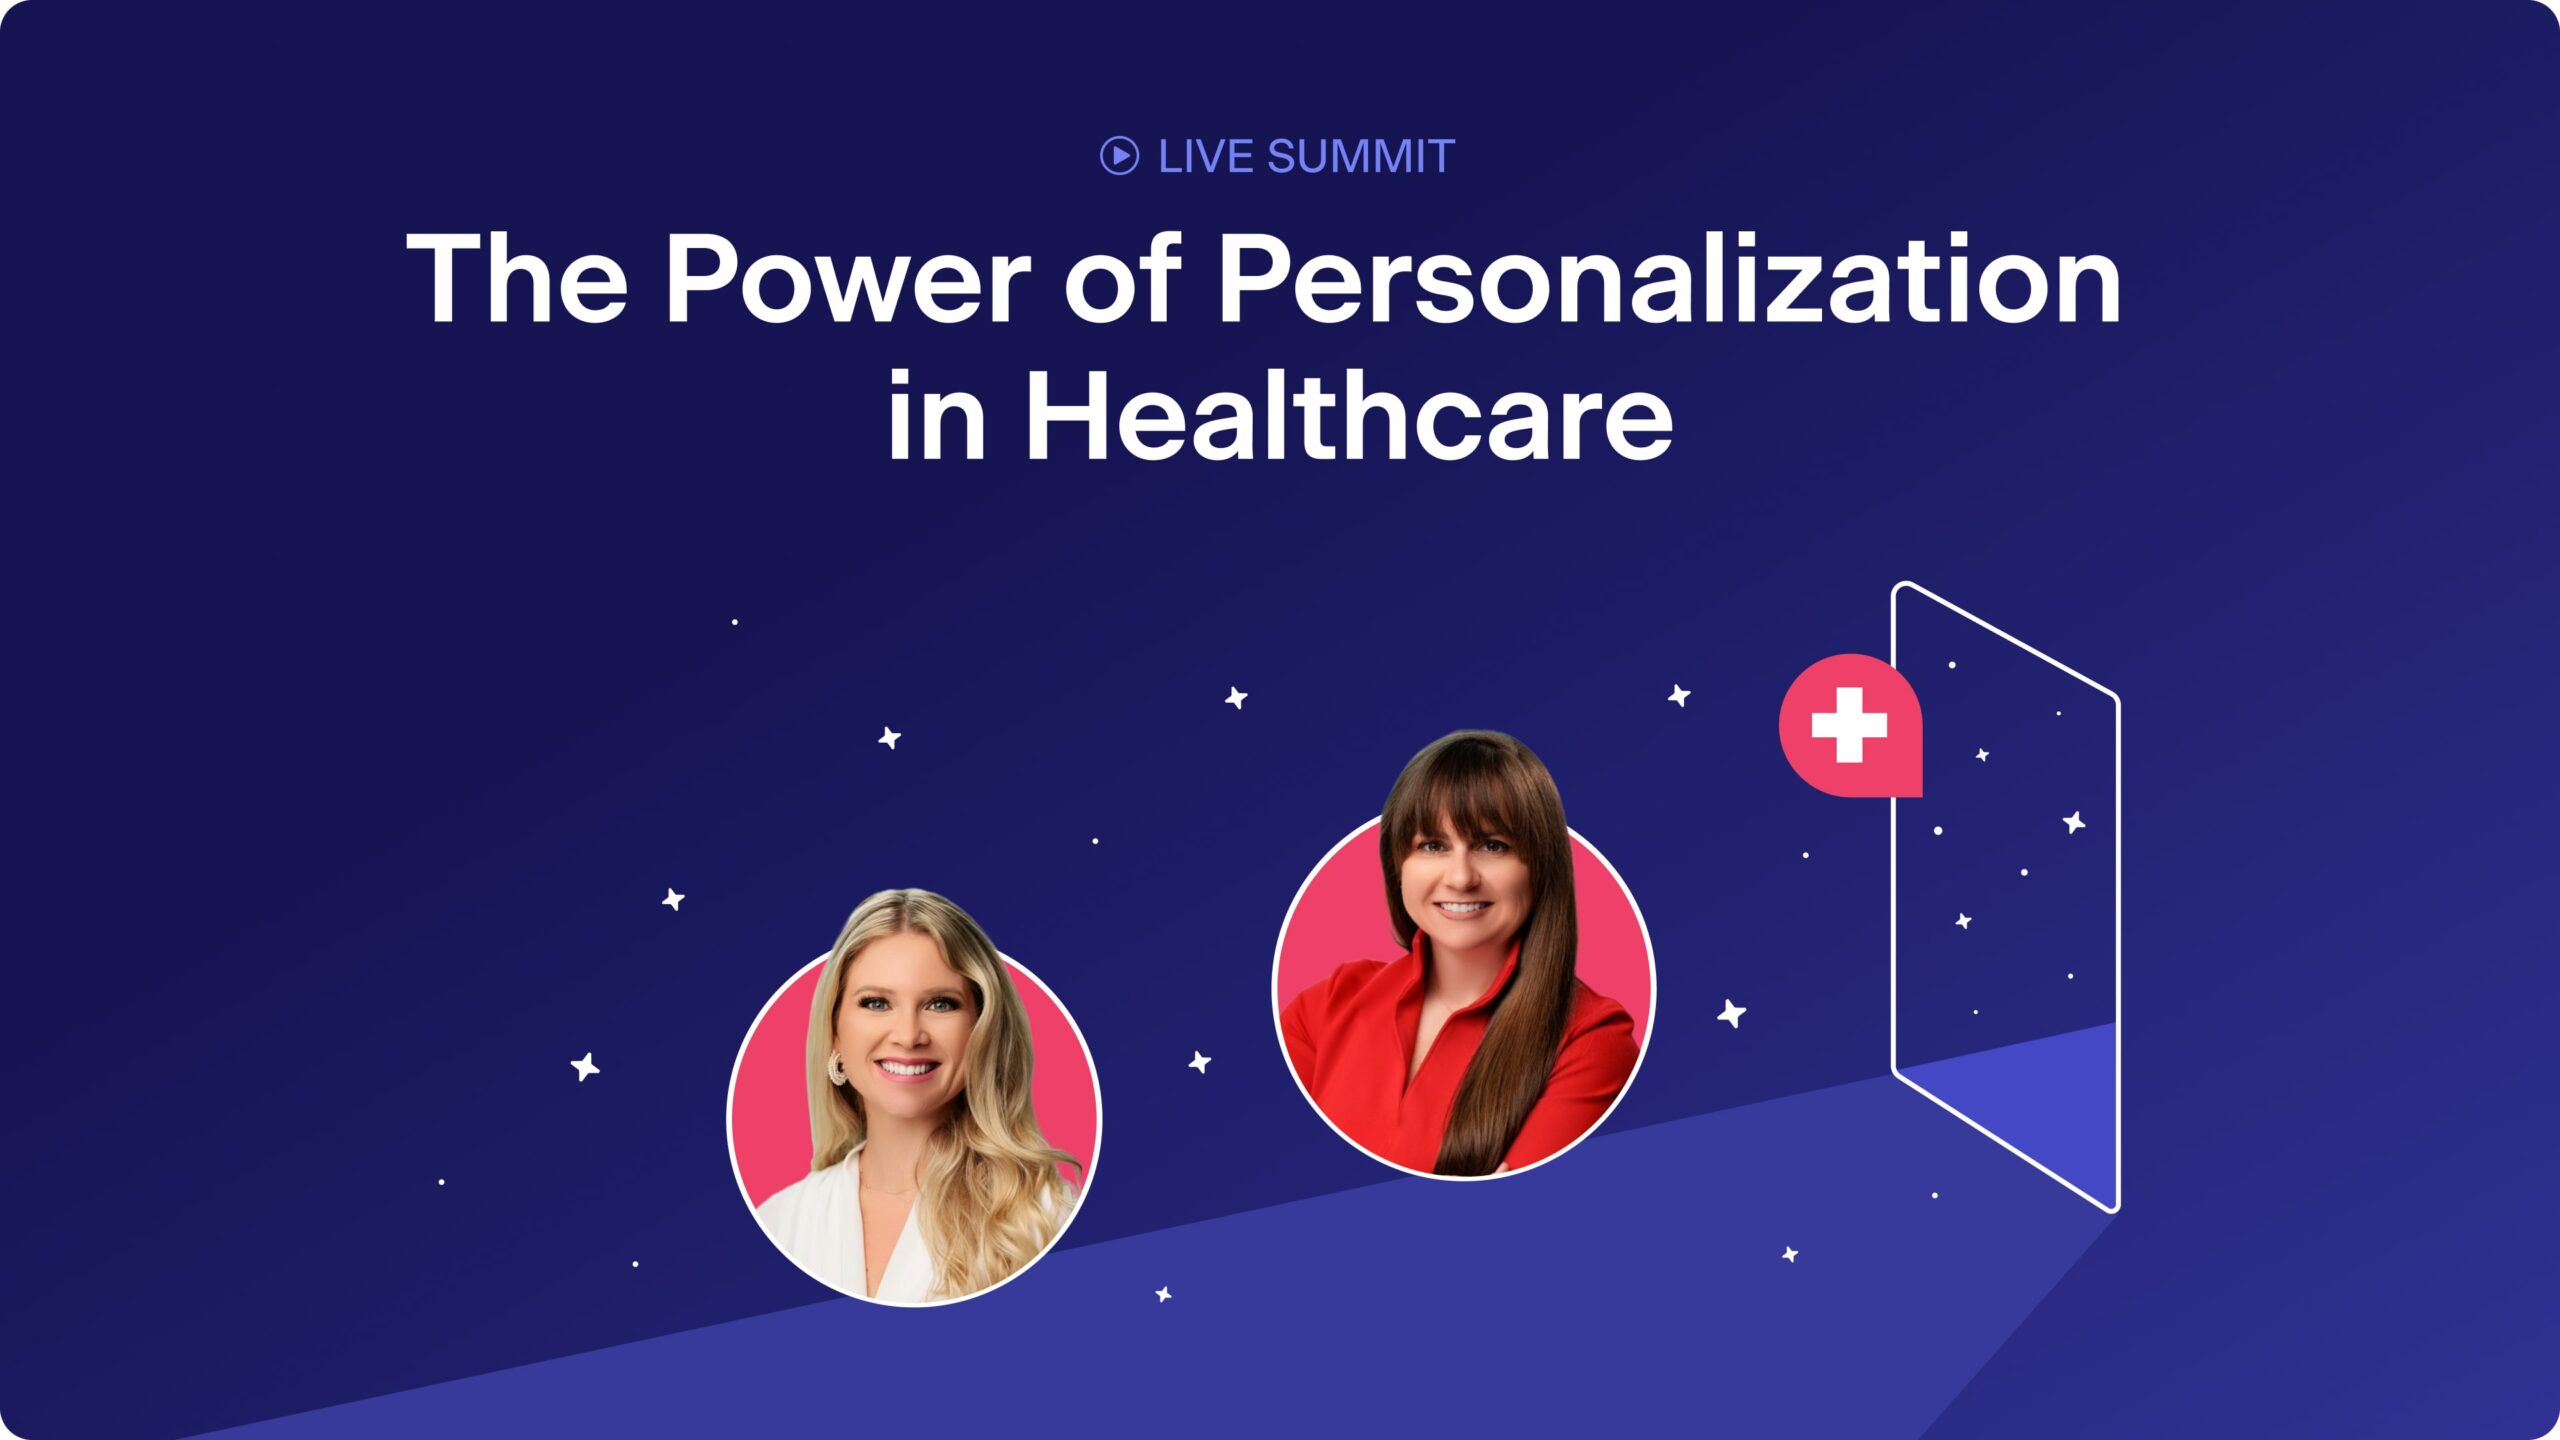 The Power of Personalization and Technology in the Healthcare Consumer Journey